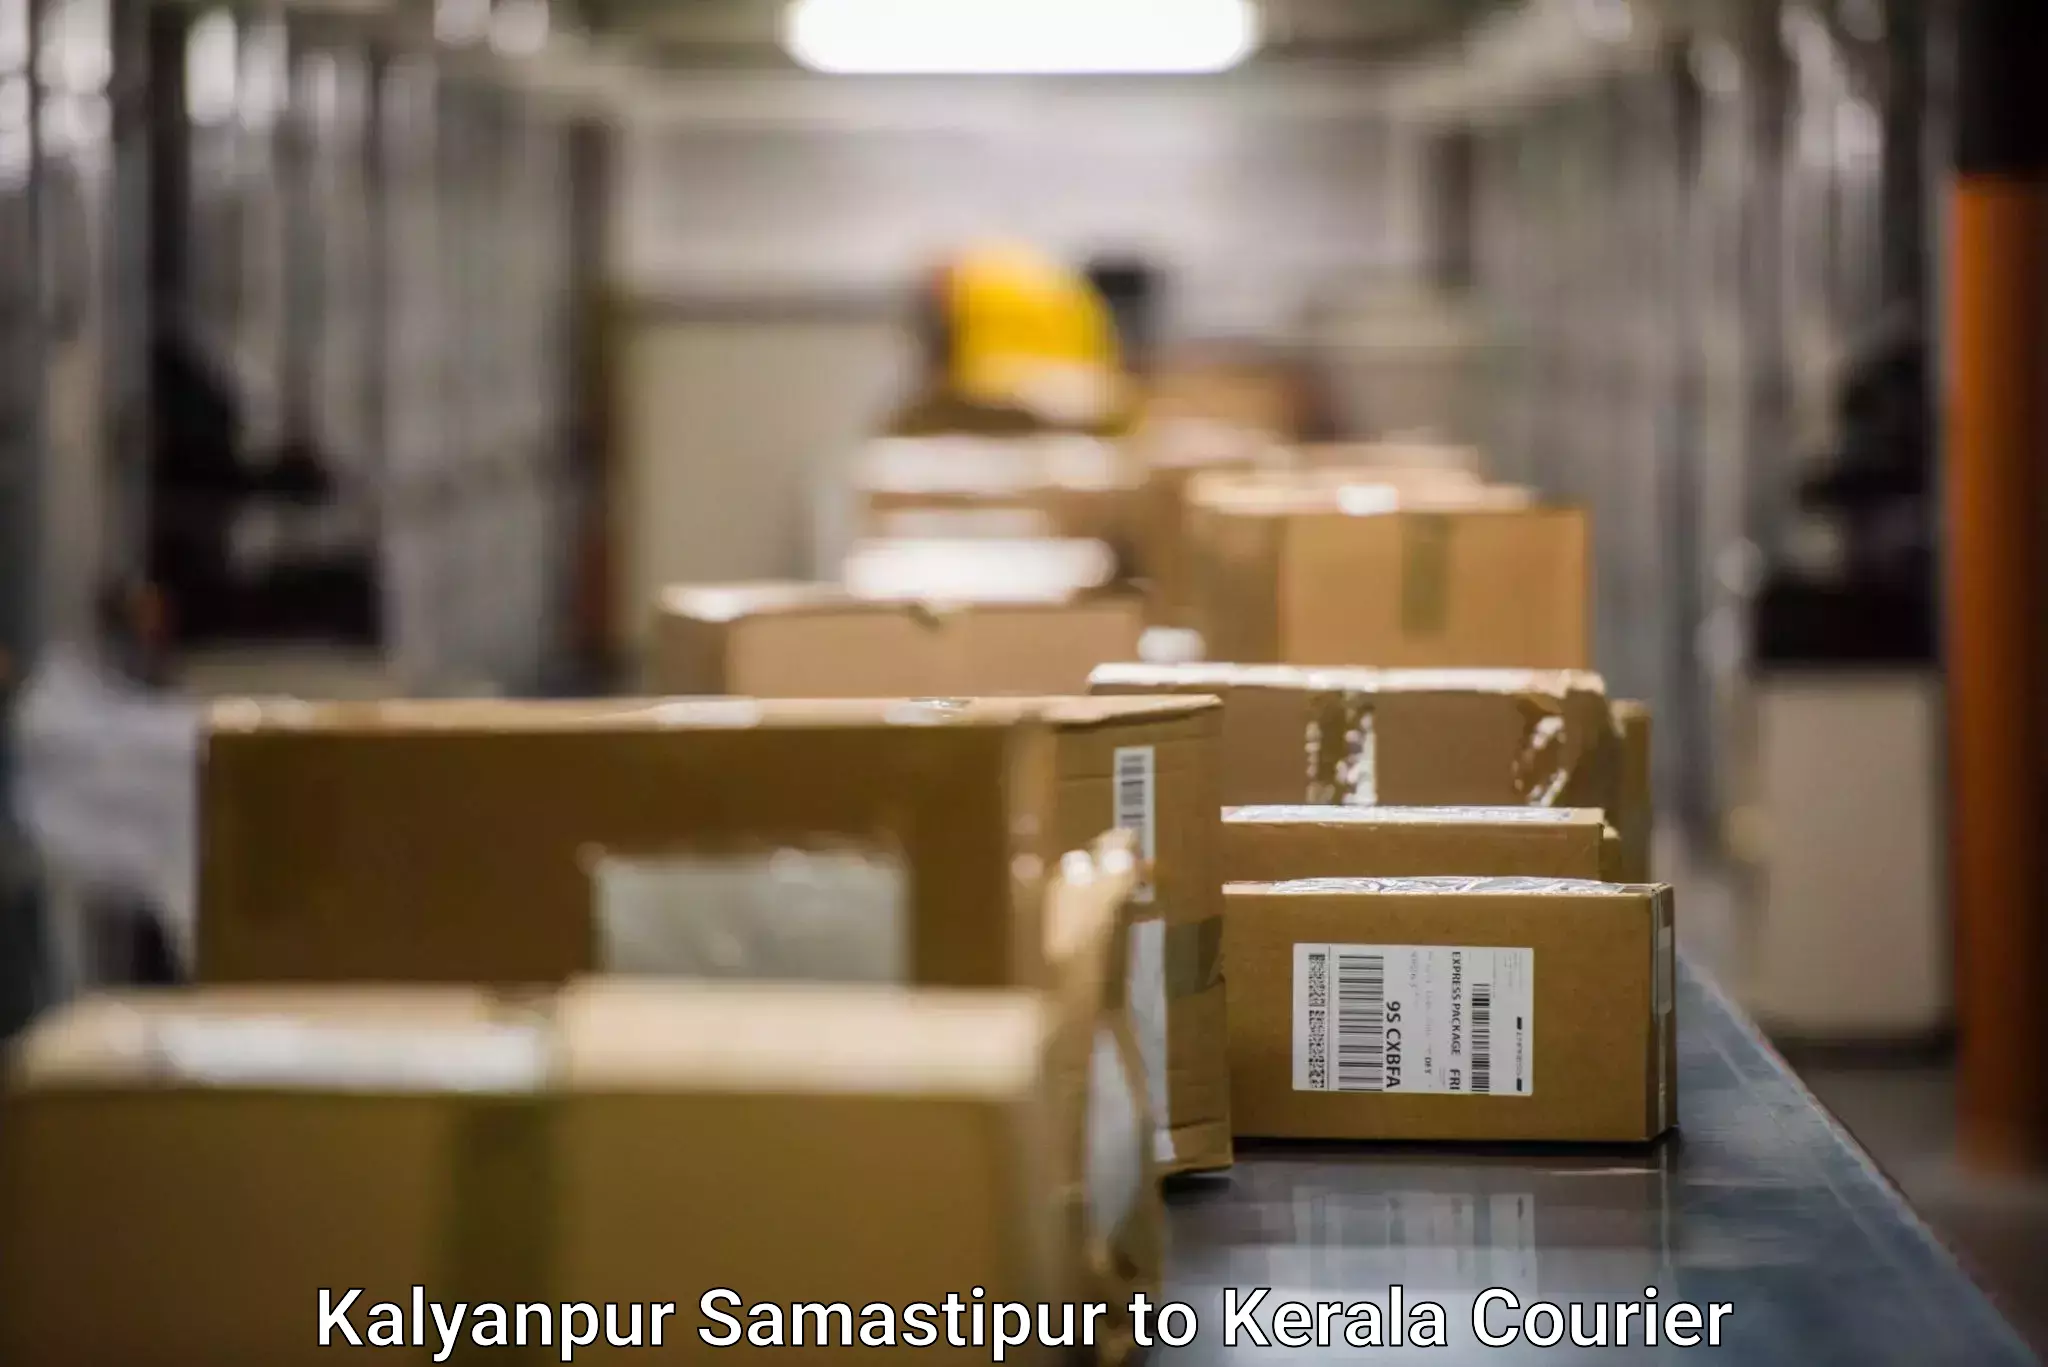 Express delivery solutions Kalyanpur Samastipur to Kerala